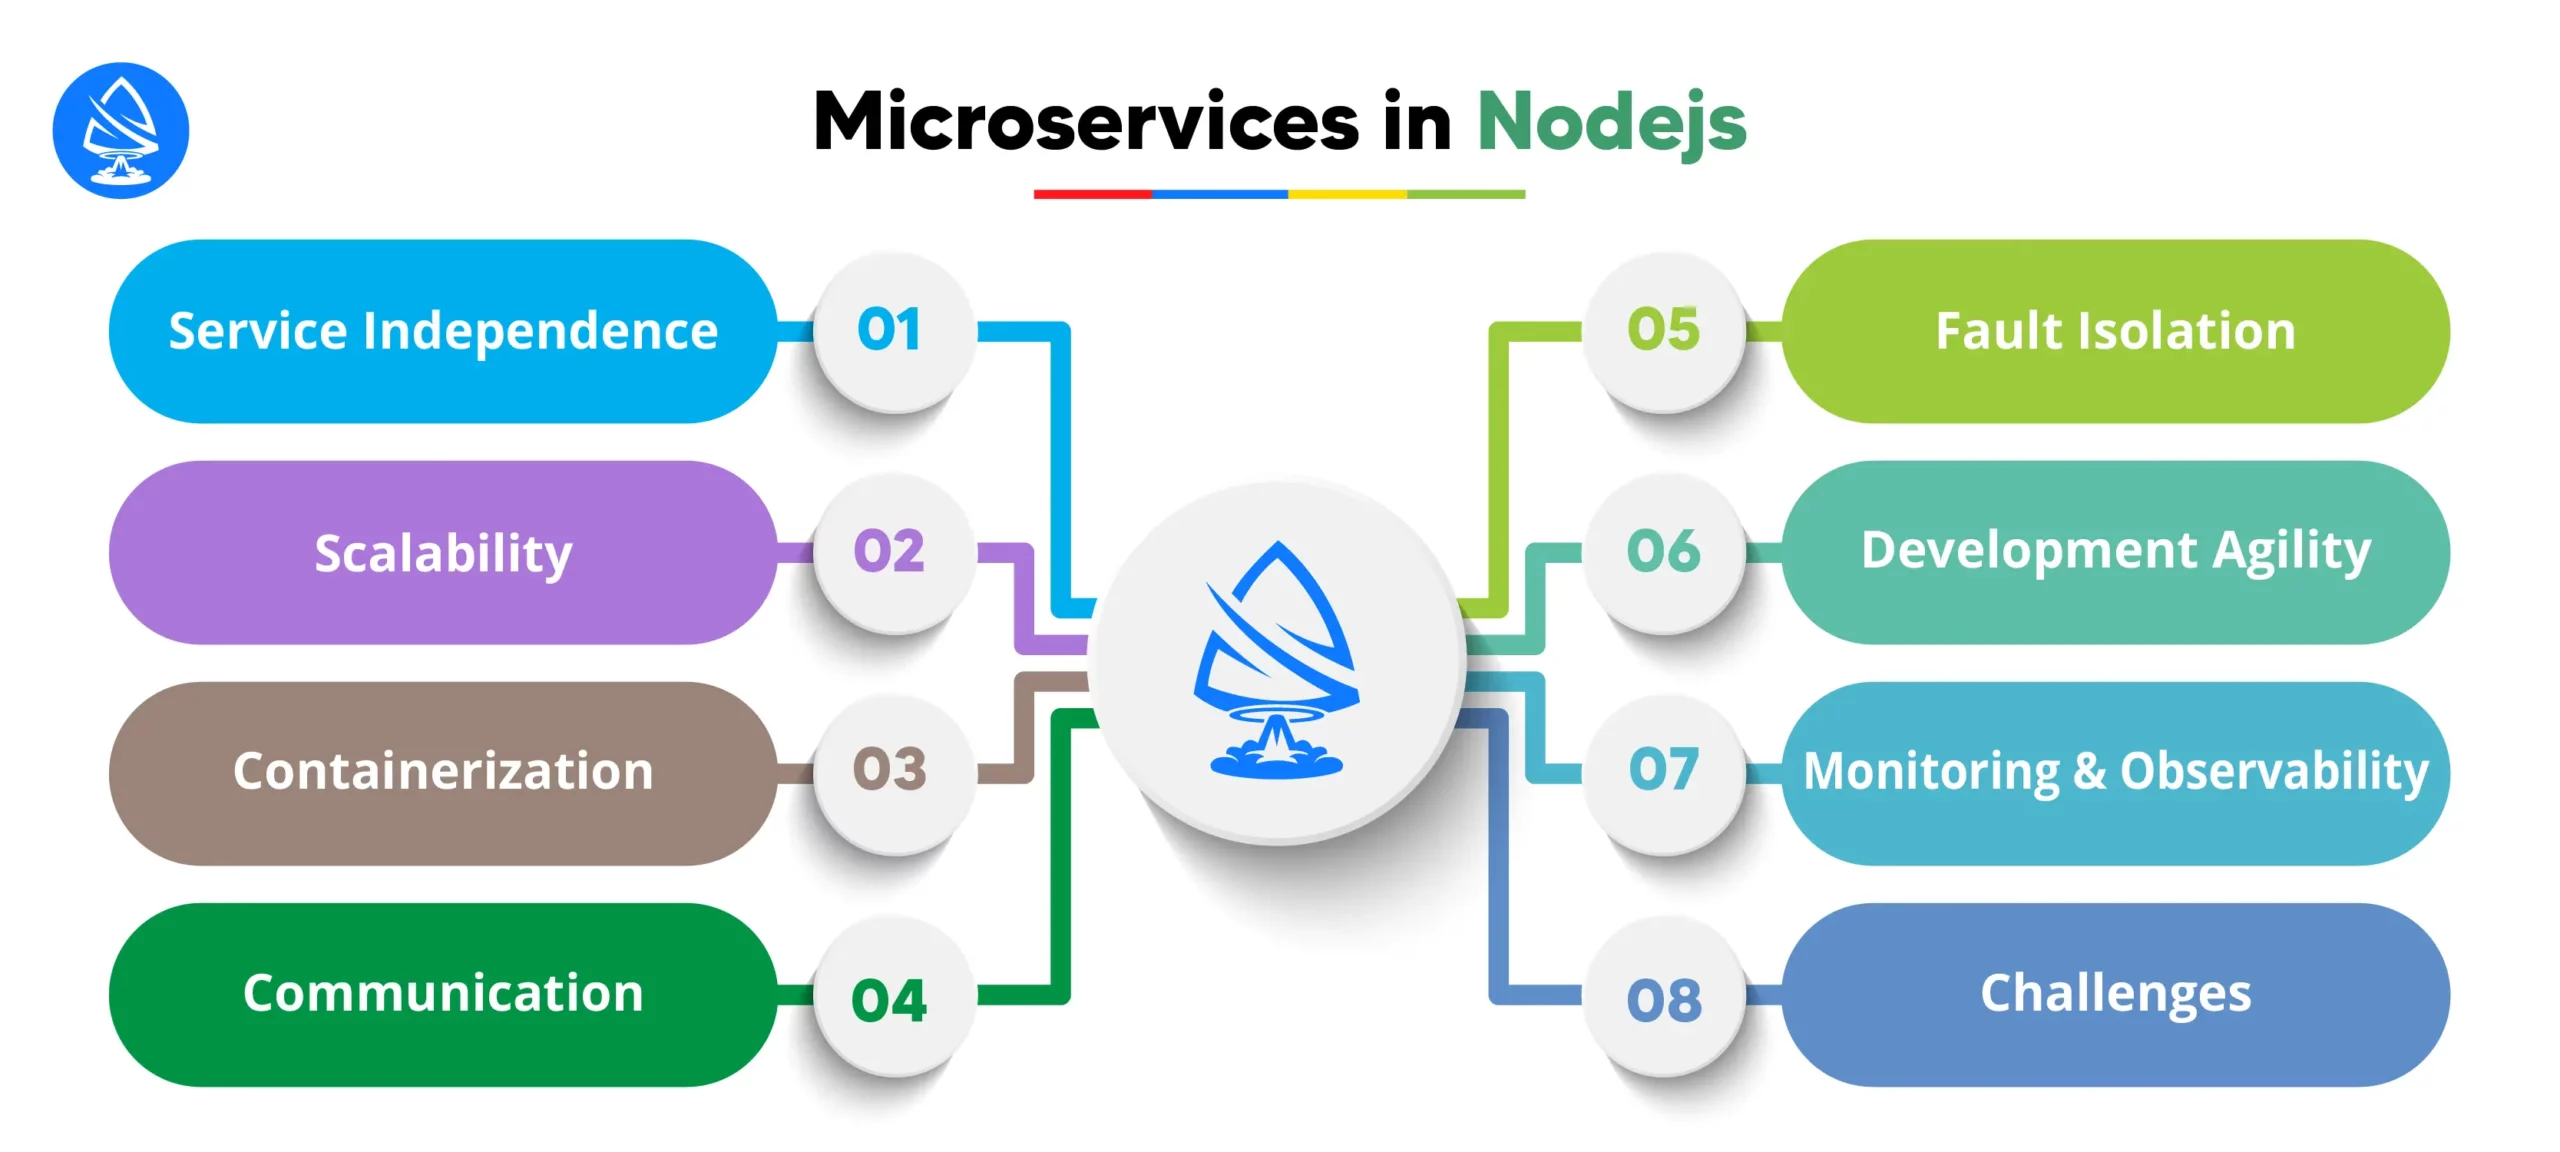 What are Microservices in NodeJS? 